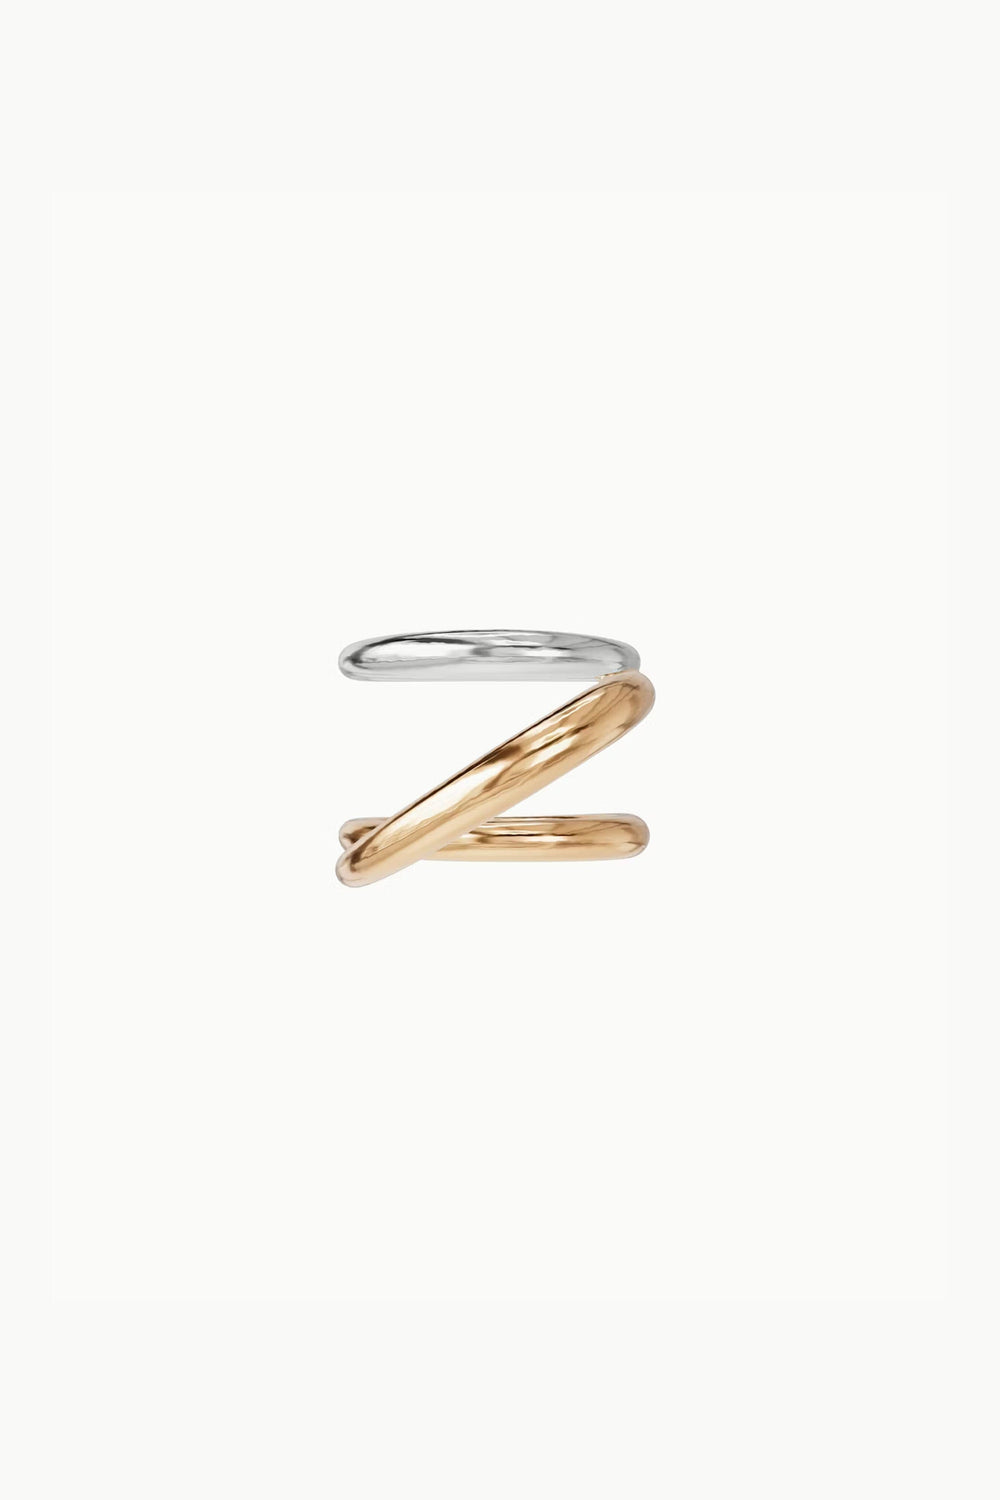 Charlotte Chesnais Bague Triplet Ring- Two Tone | WE ARE ICONIC